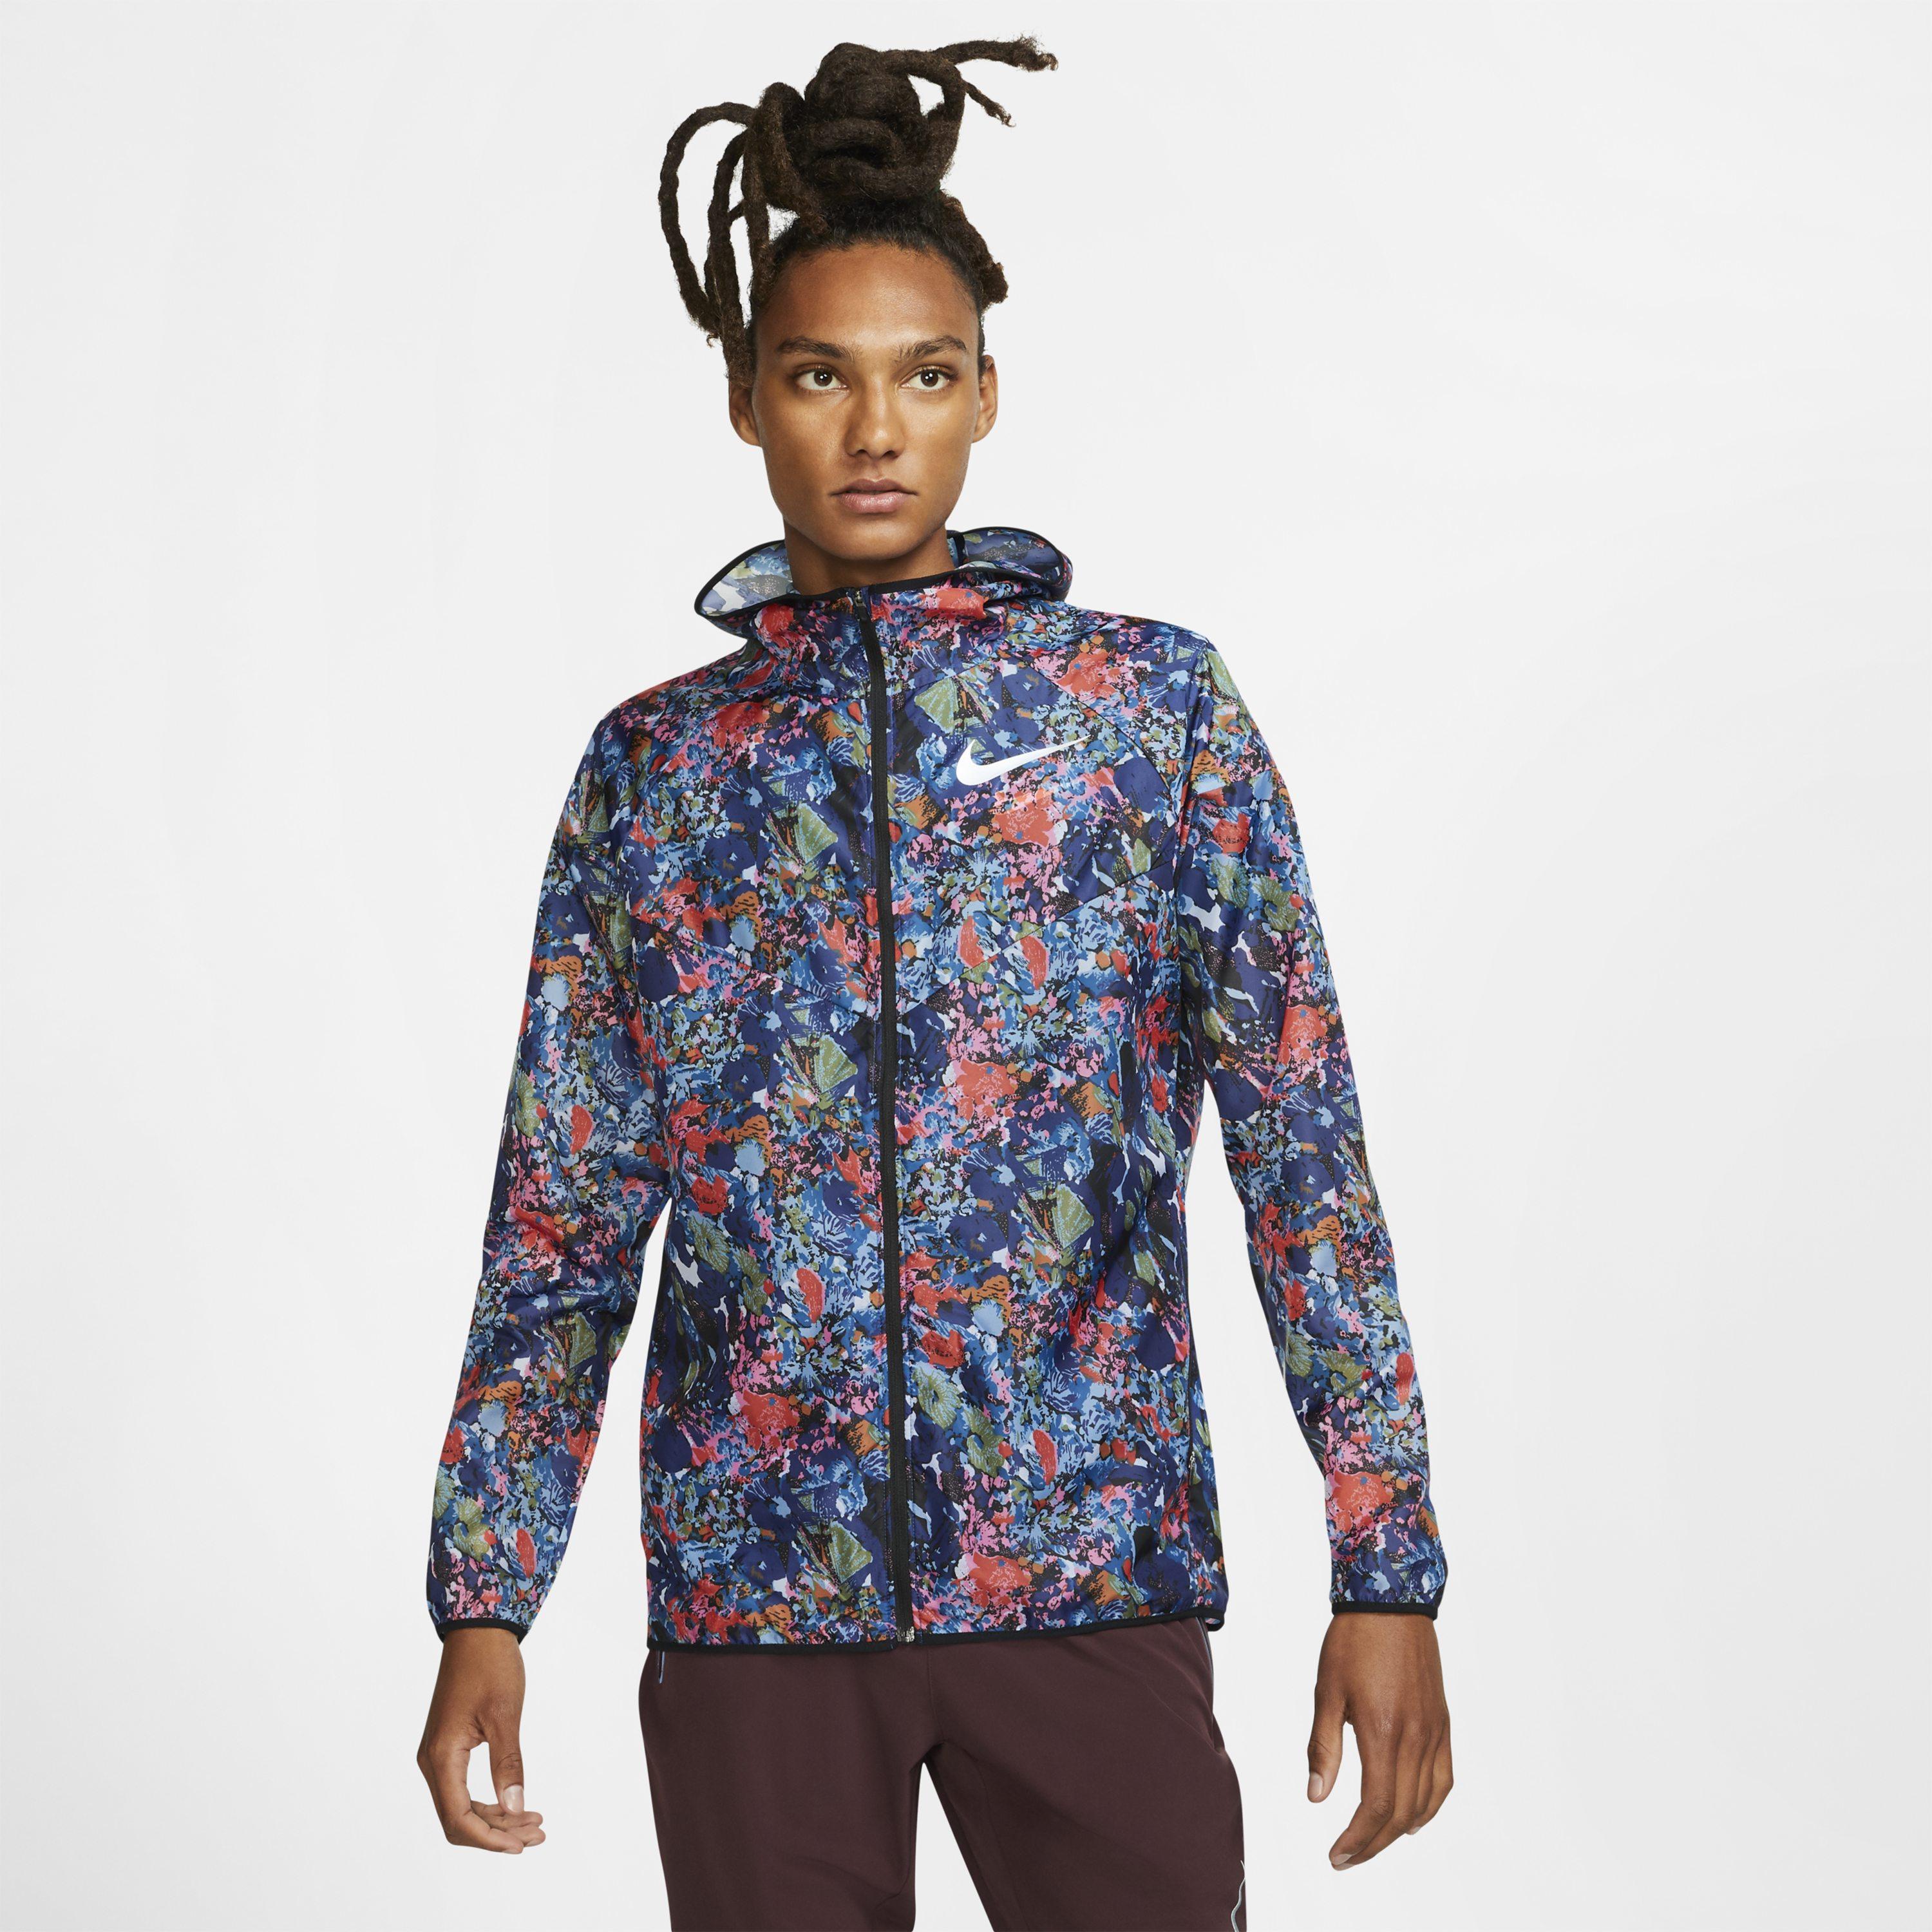 Nike Windrunner Printed Jacket Flash Sales, UP TO 61% OFF | seo.org